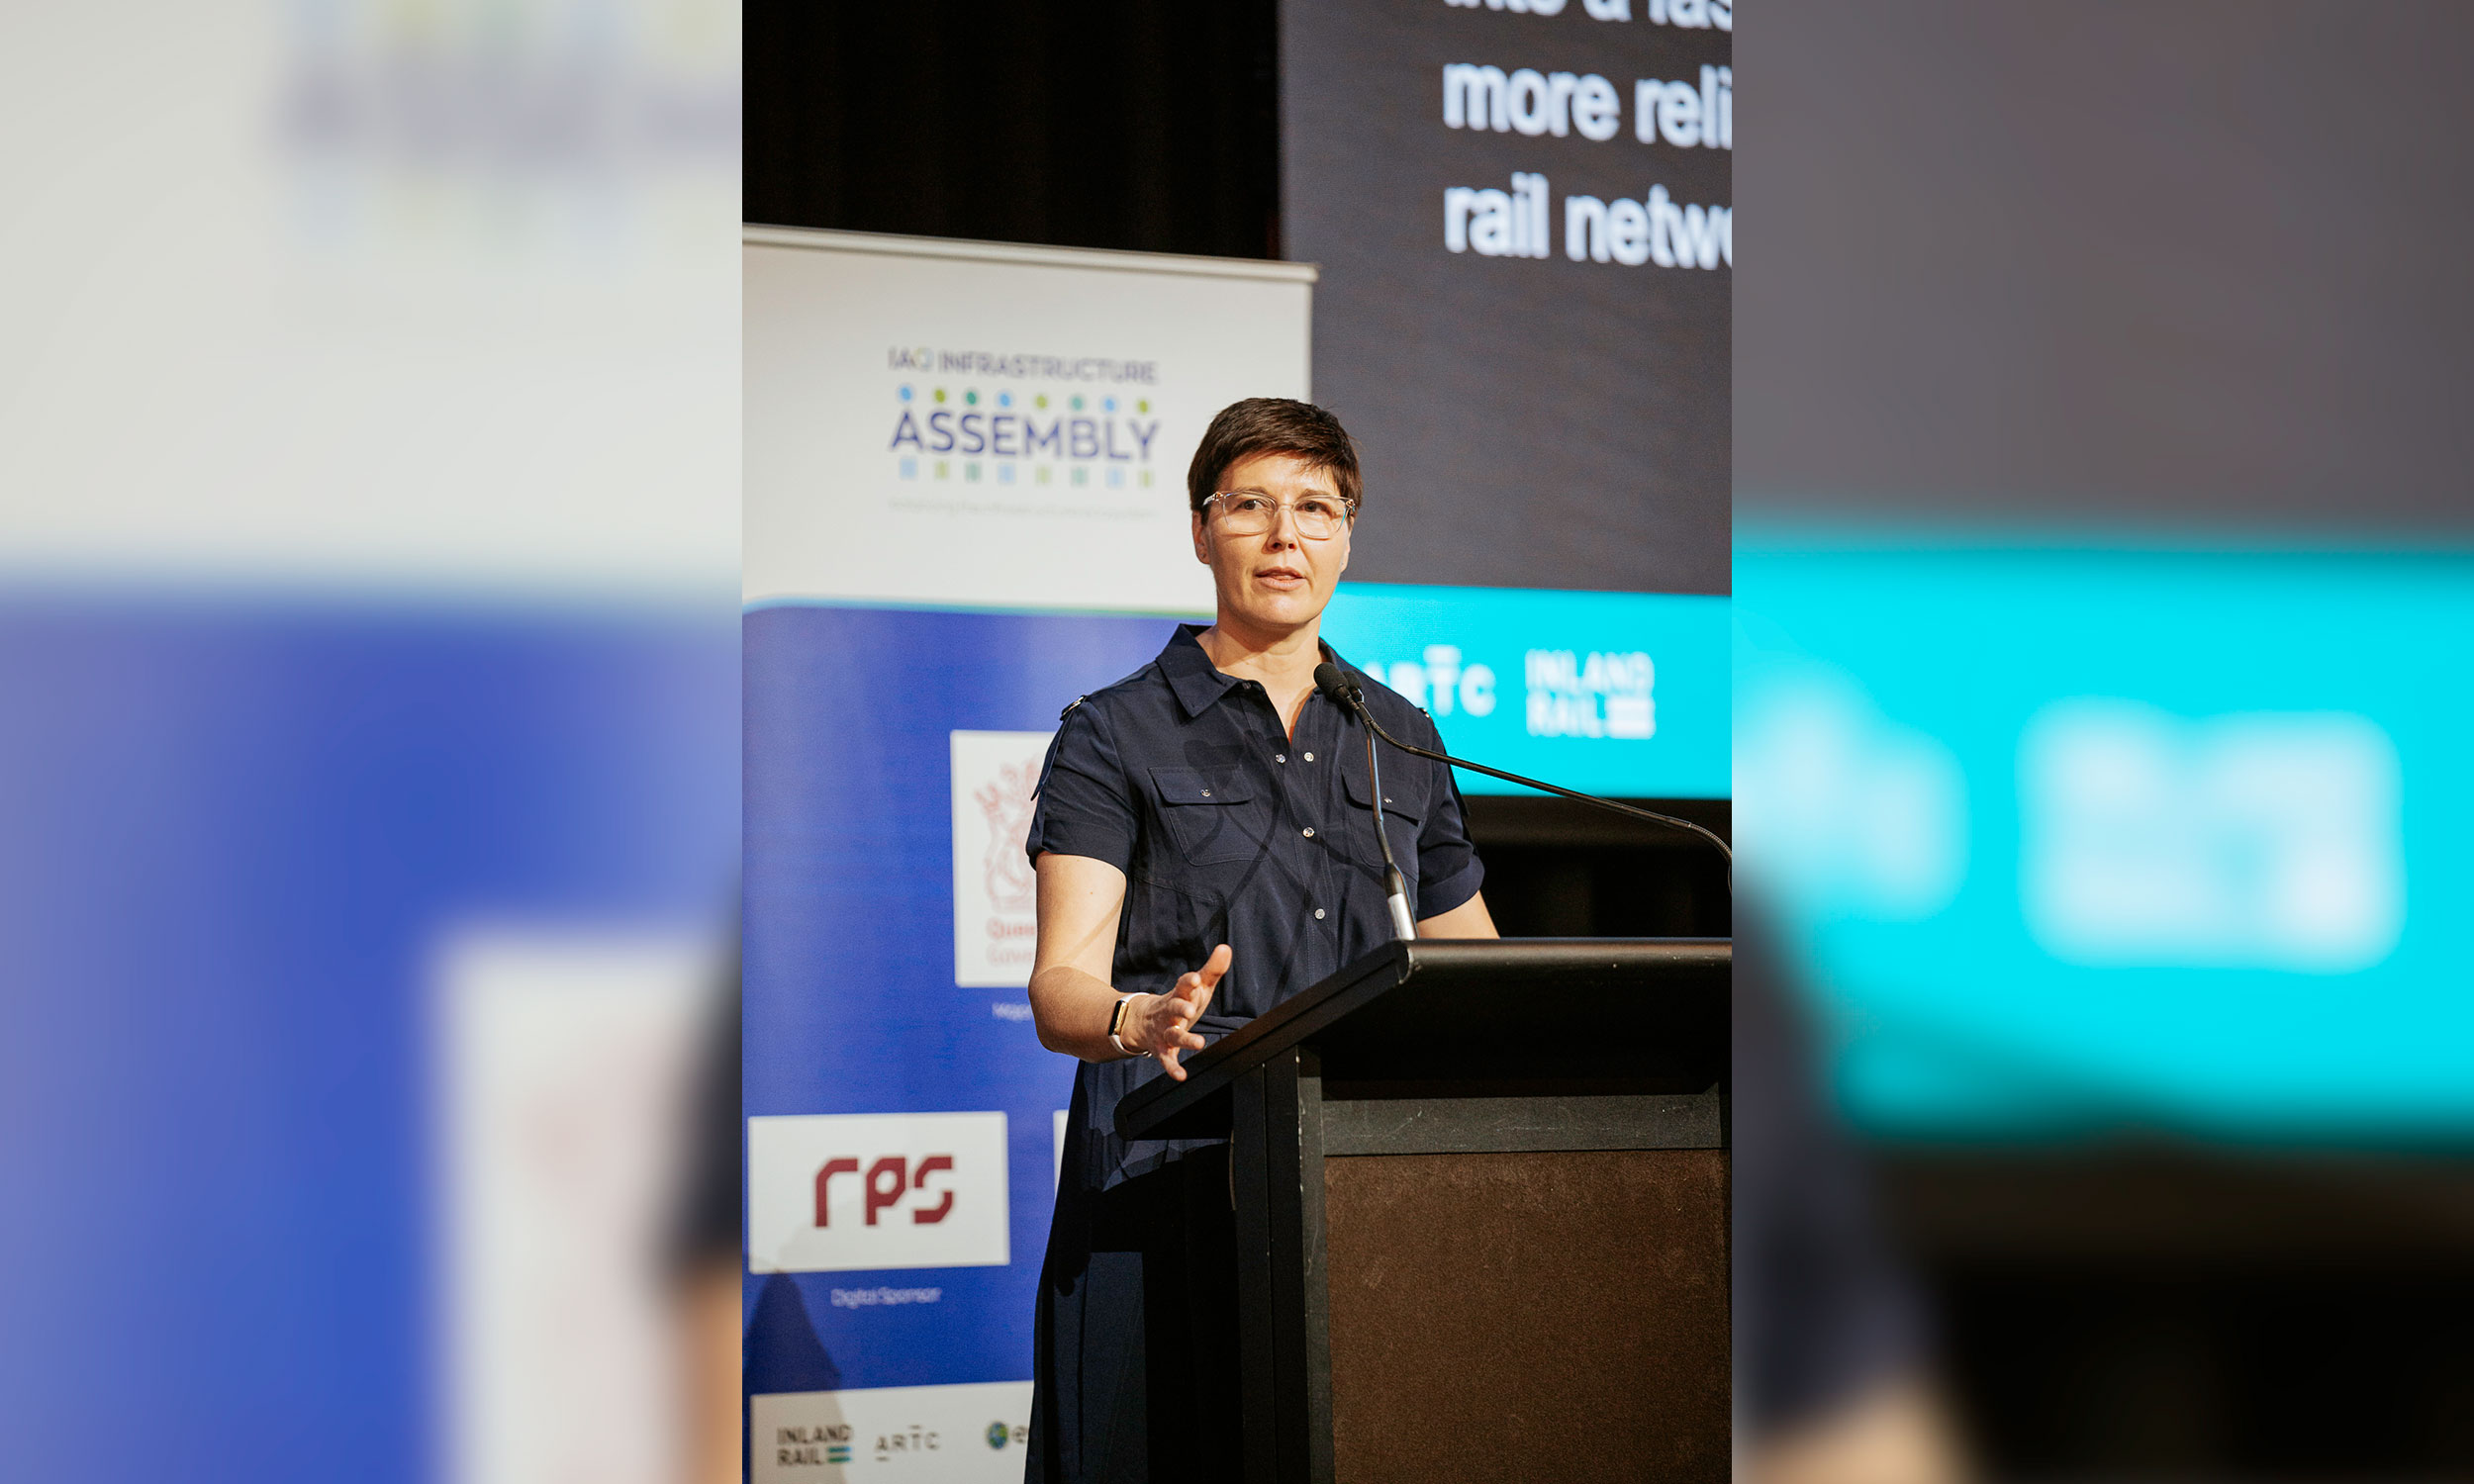 Inland Rail Interim Chief Executive speaking at the IAQ 2022 conference